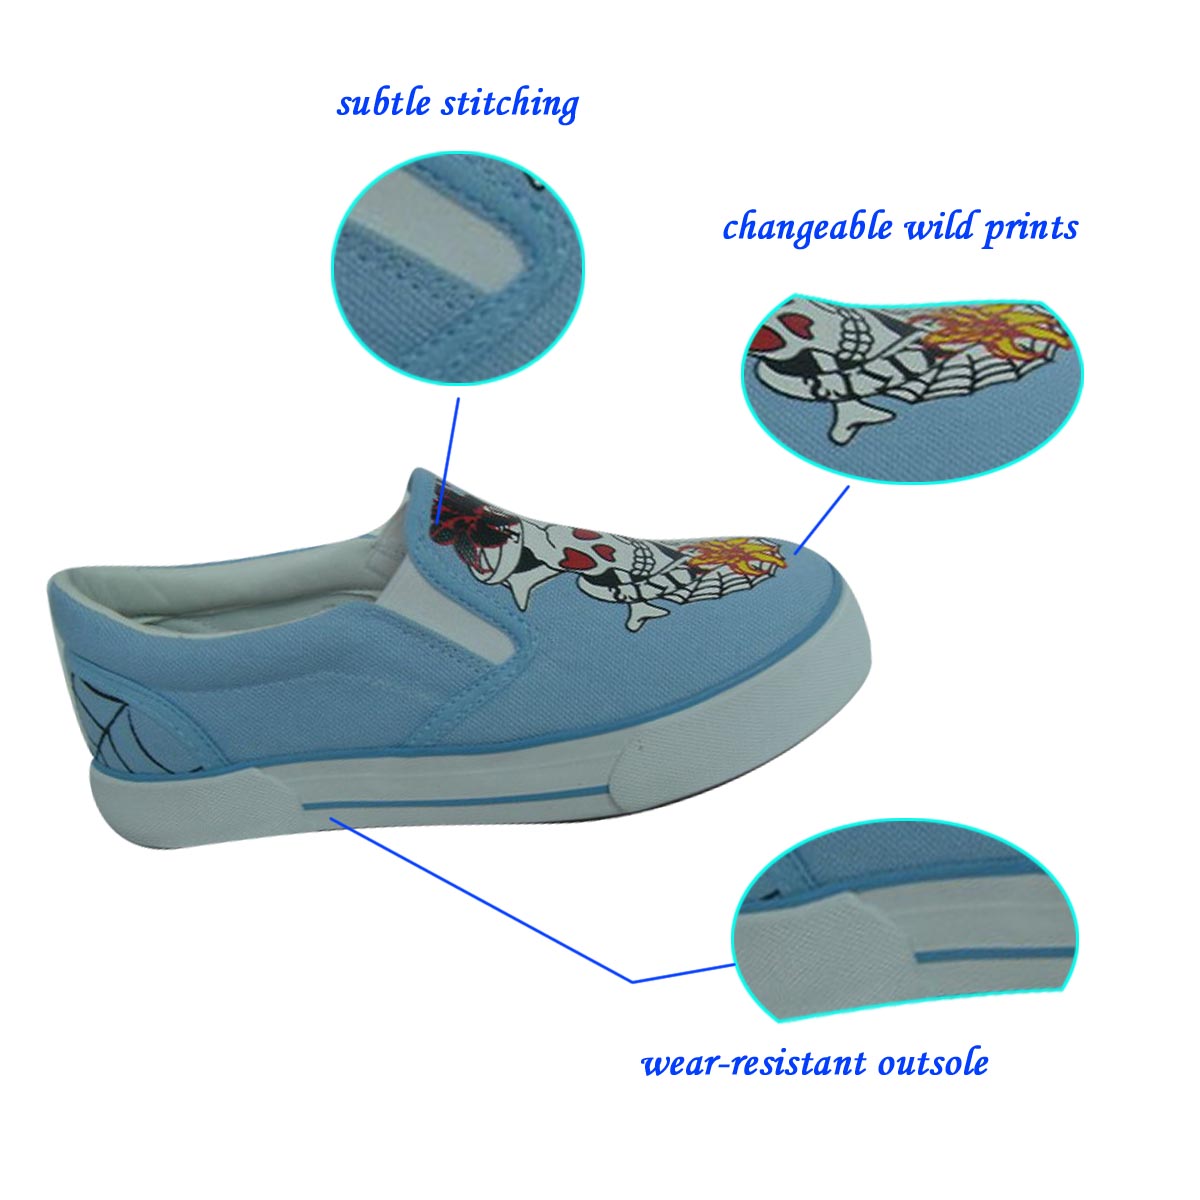 2018 Fashionable Printed Blue Unisex Slip-on Casual Kid Vulcanized Shoe from China Jinjiang with high quality and low price